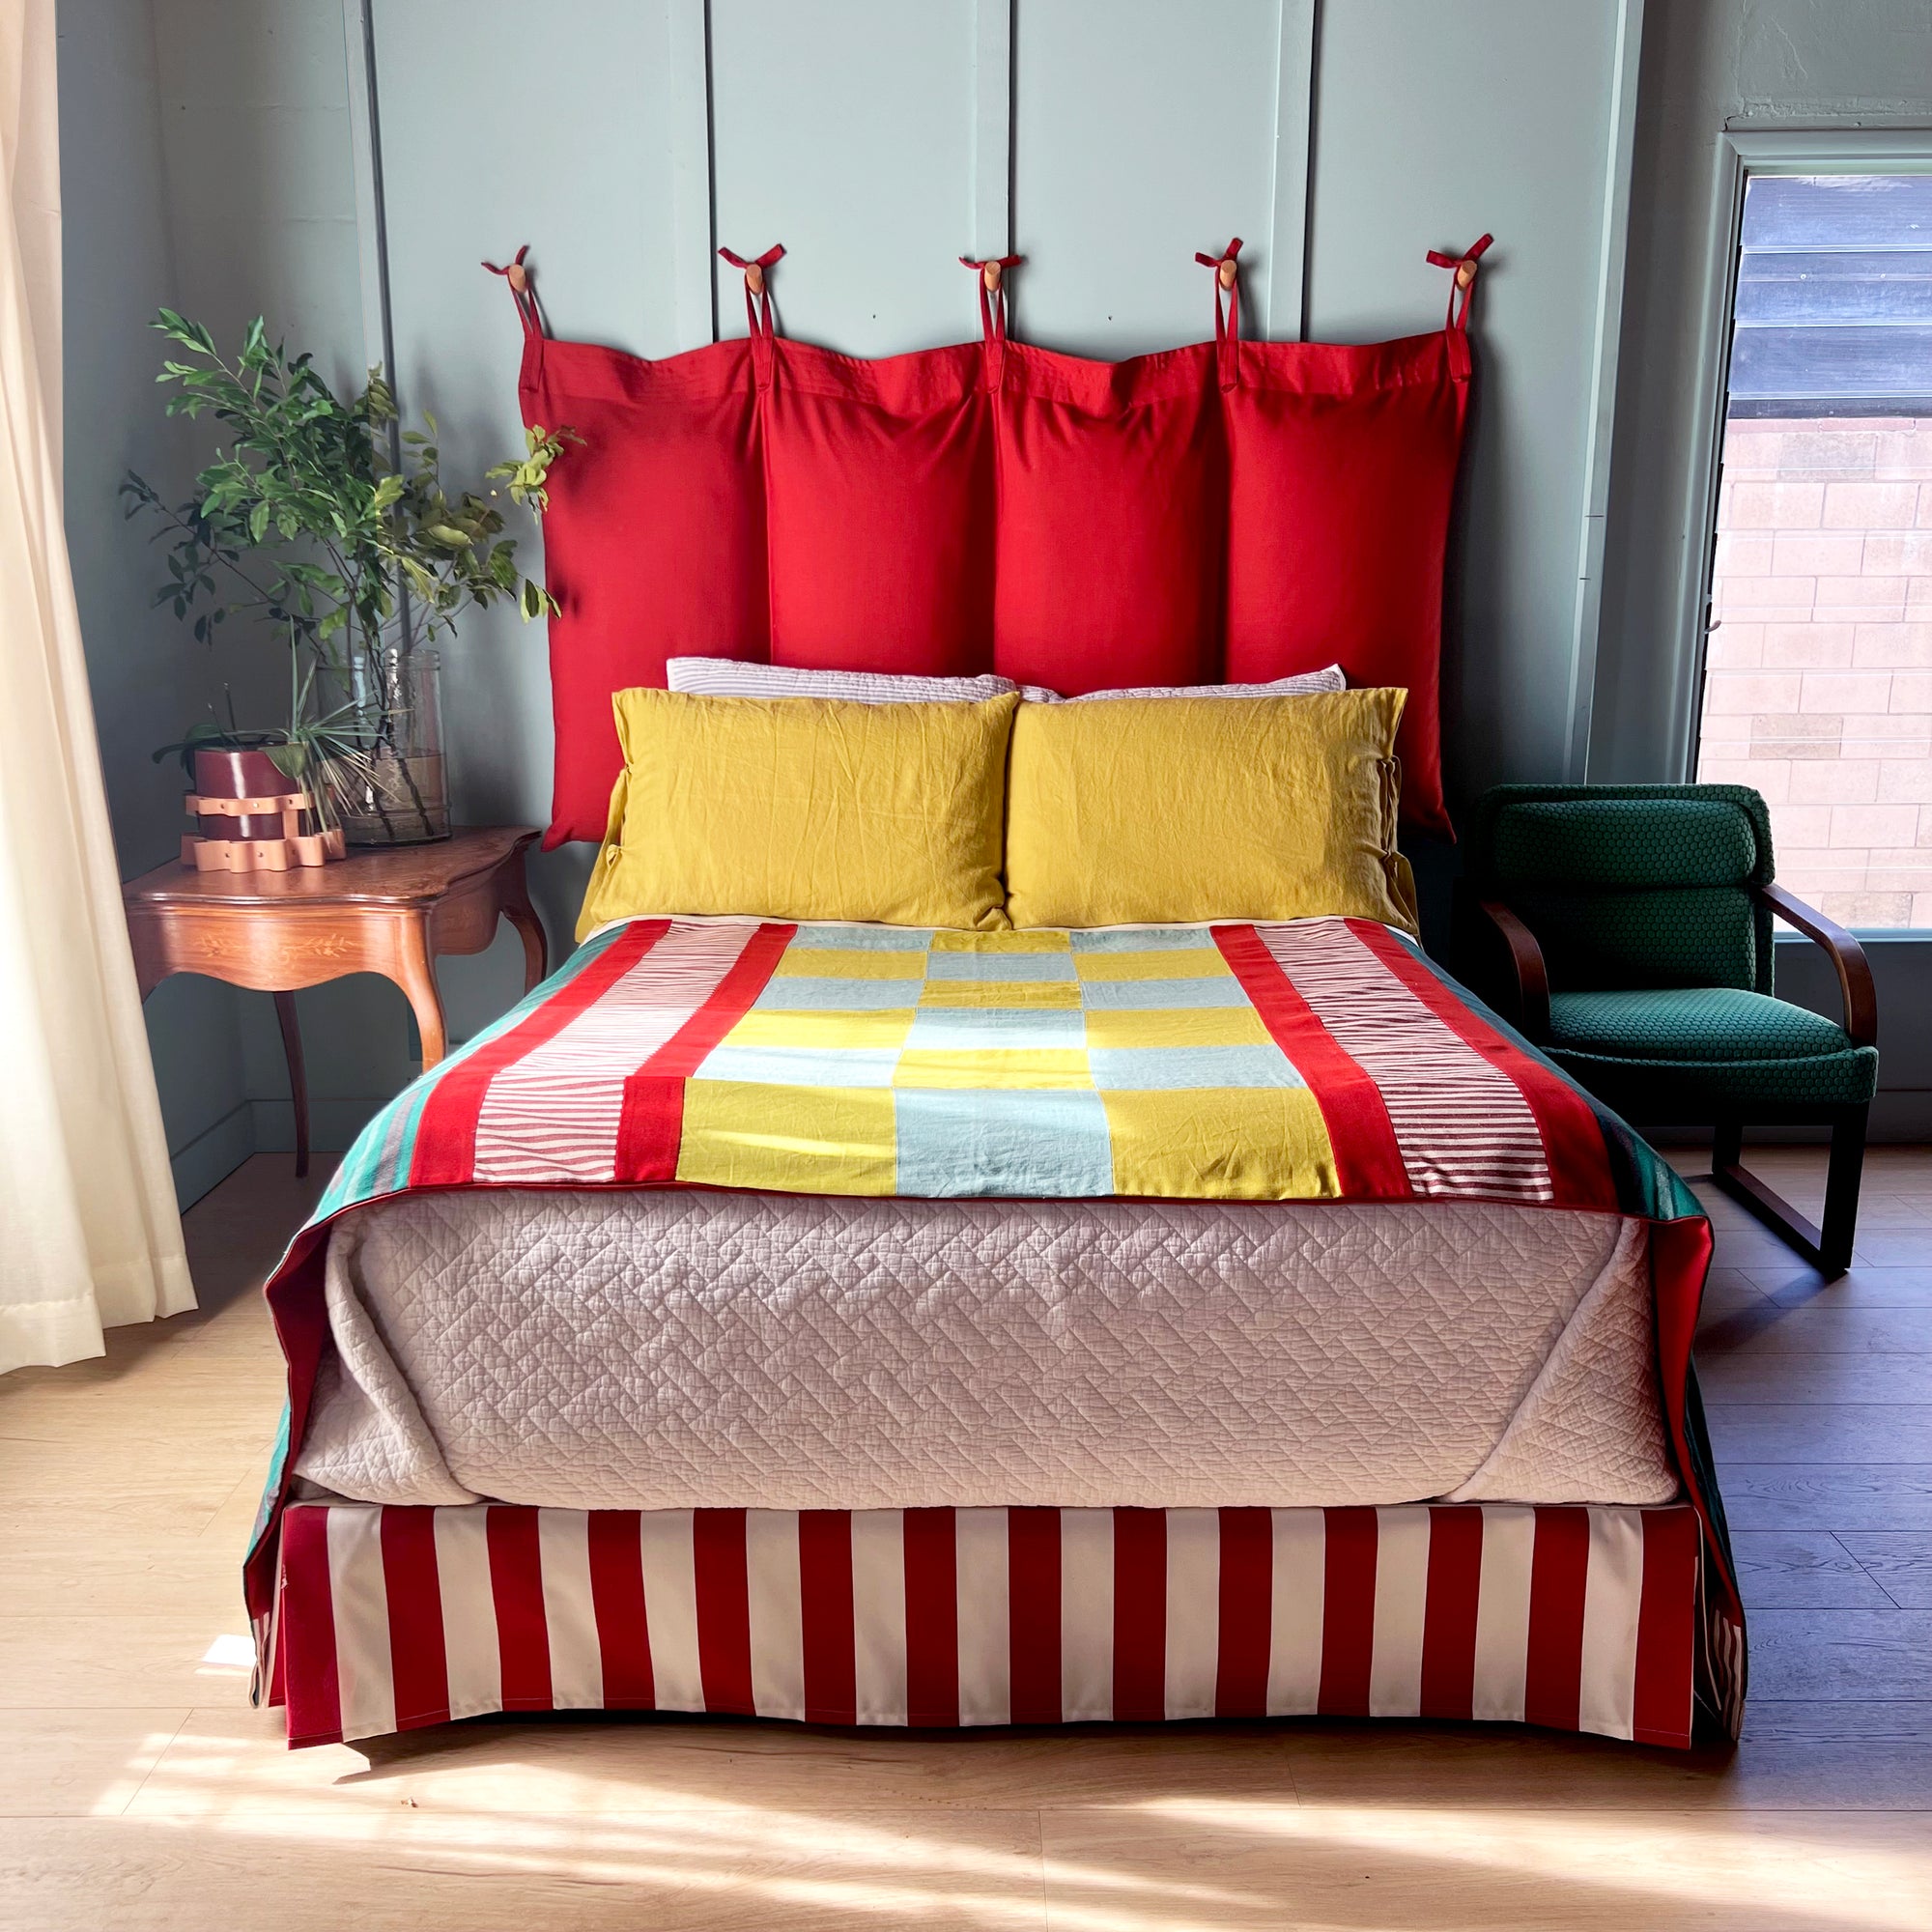 The Puff Headboard - Tomato Red Performance Linen